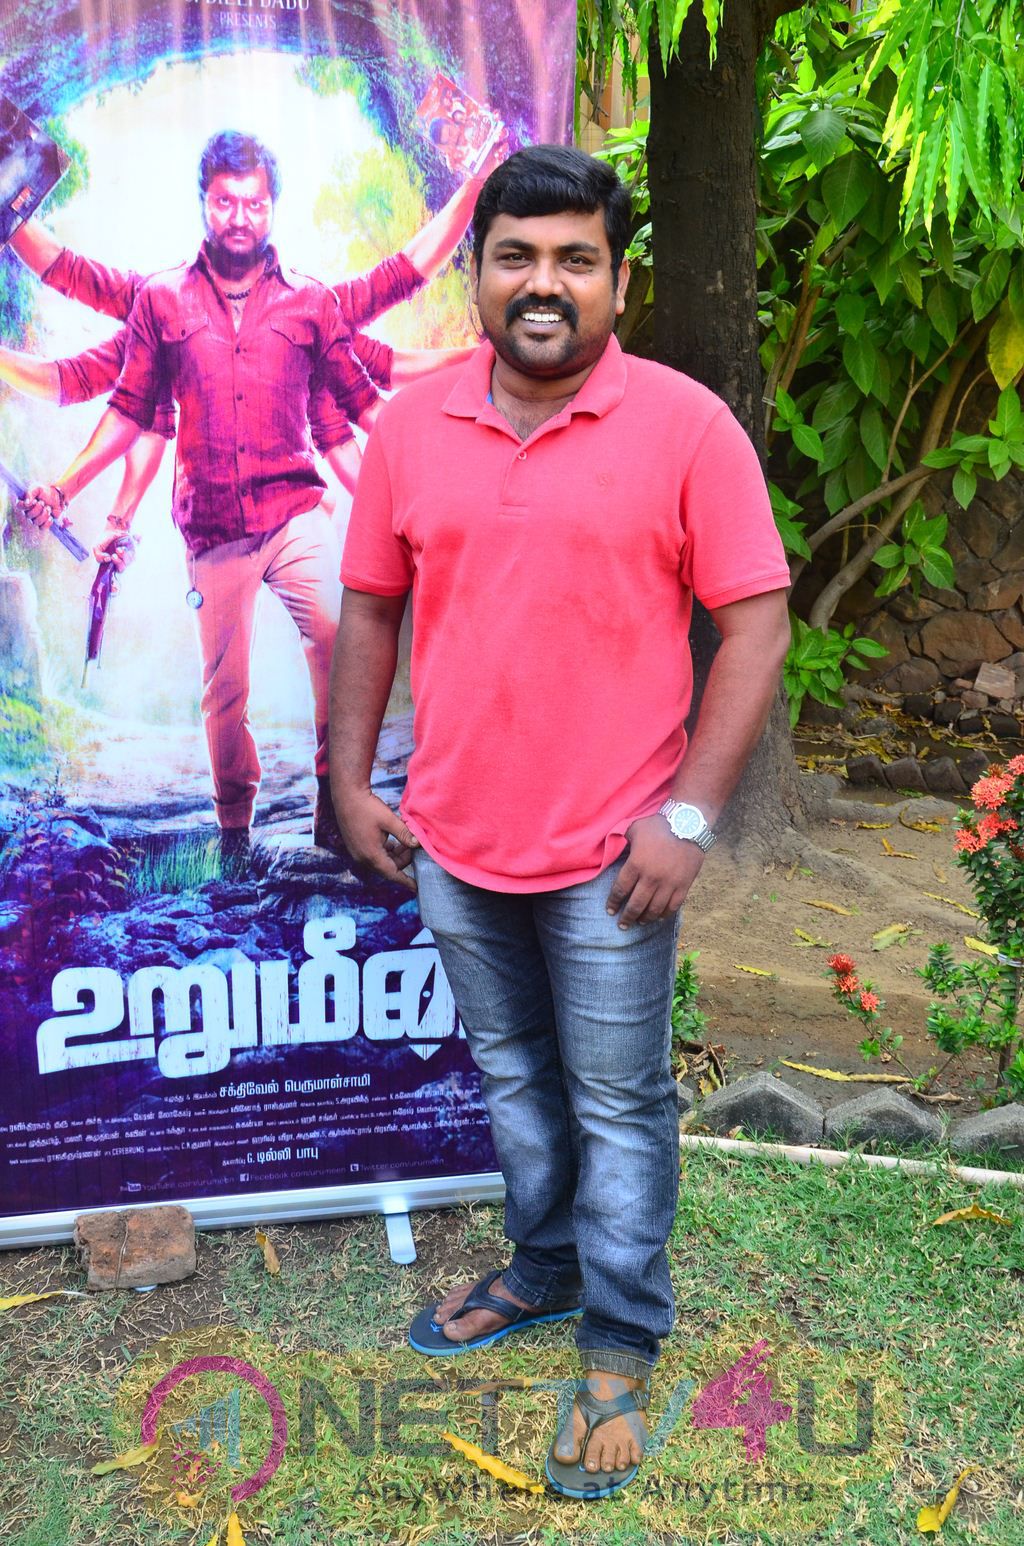  kaali venkat tamil supporting actor images 1